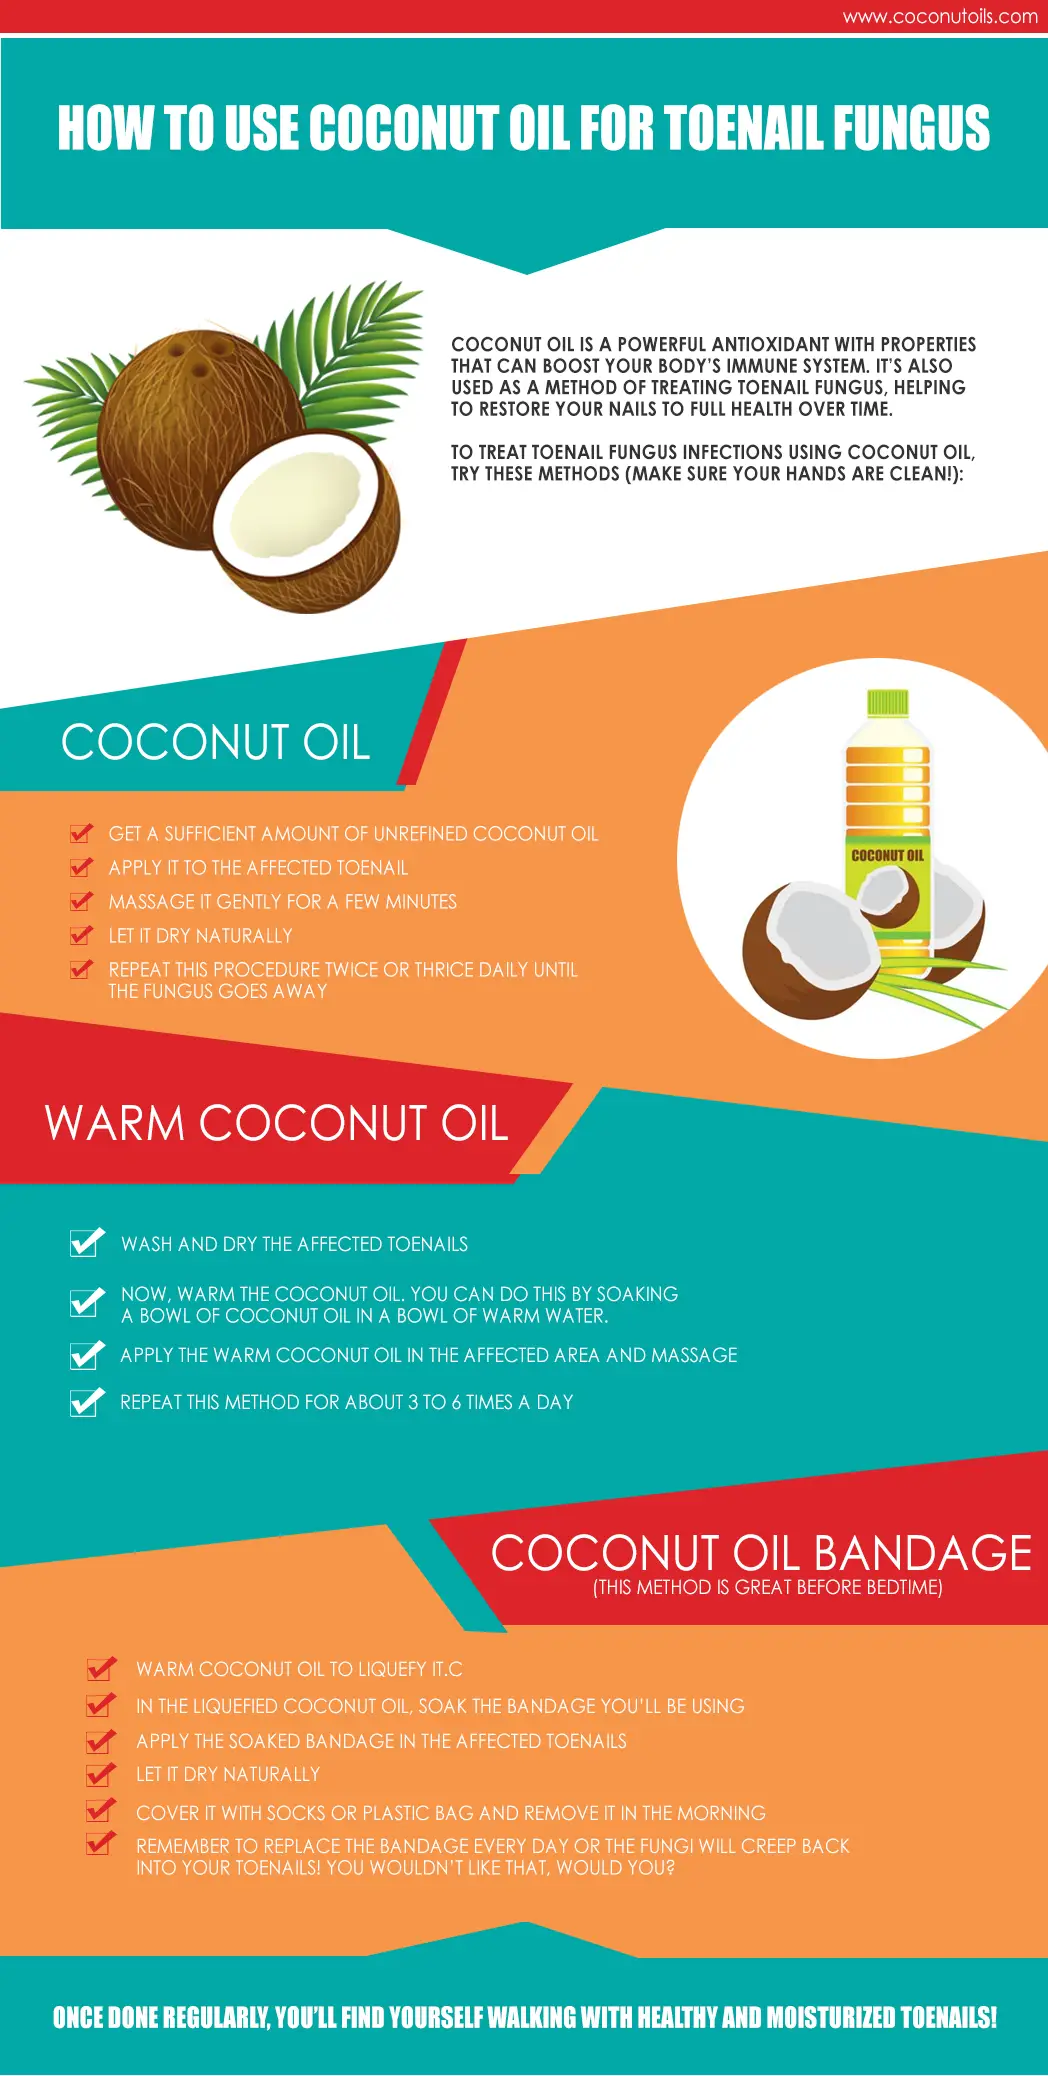 Coconut Oil for Treating Toenail Fungal Infections